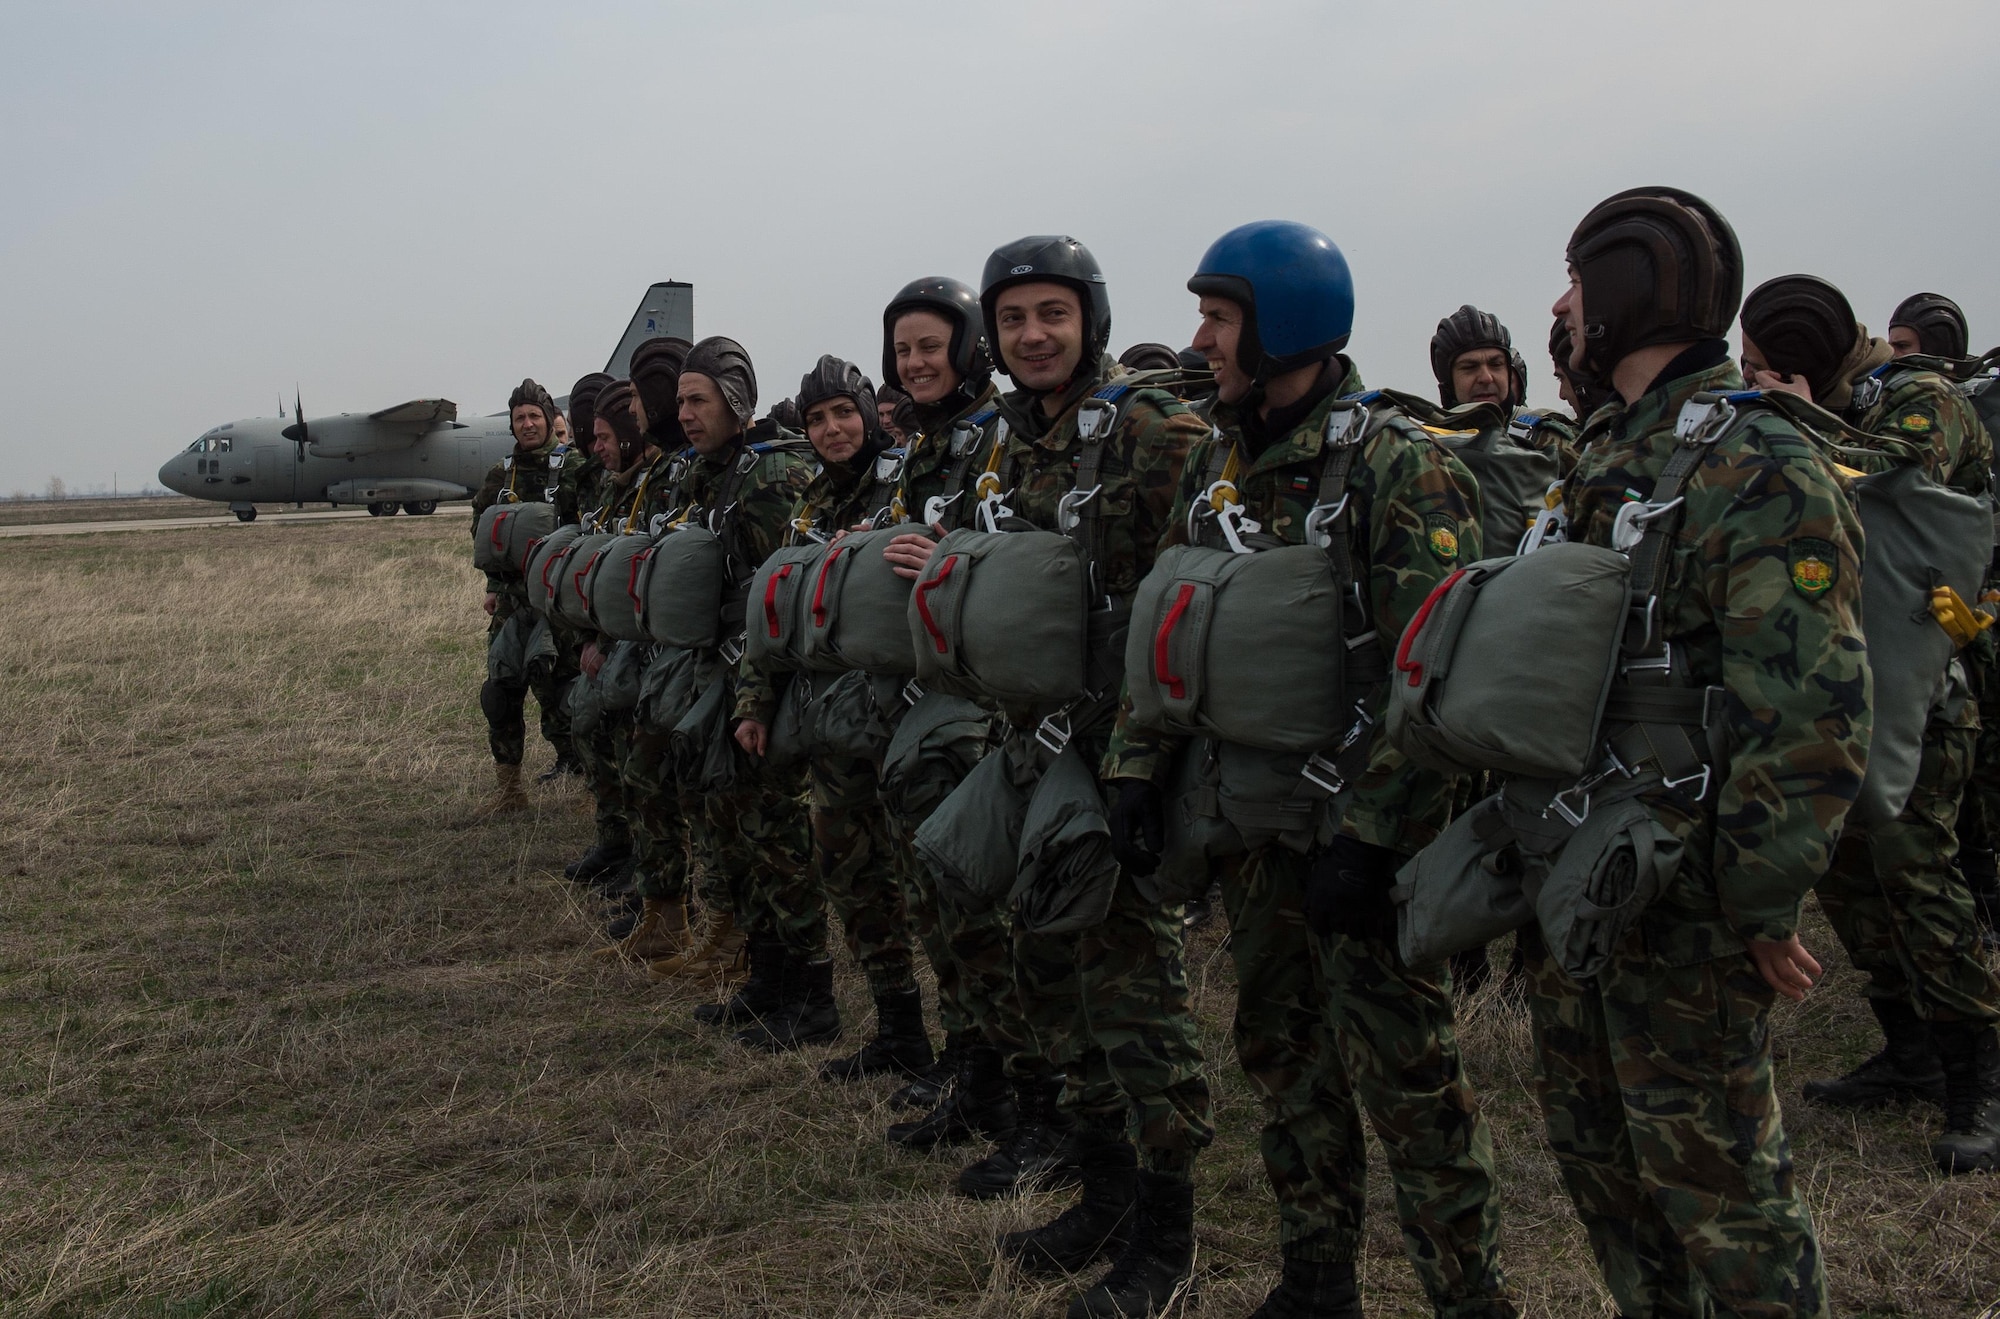 Bulgarian paratroopers wait to load two Super Hercules C-130Js and an Alenia C-27J Spartan during Exercise Thracian Spring 17 over Plovdiv Regional Airport, Bulgaria, March 15, 2017. The 37th AS air crew and 435th Contingency Response Group jump masters from Ramstein Air Base, Germany, worked directly with the paratroopers to conduct tactical flight training. The two-week combined training with Bulgaria’s military aims to facilitate overall relations and build their nations’ joint military capabilities. (U.S. Air Force photo by Staff Sgt. Nesha Humes)